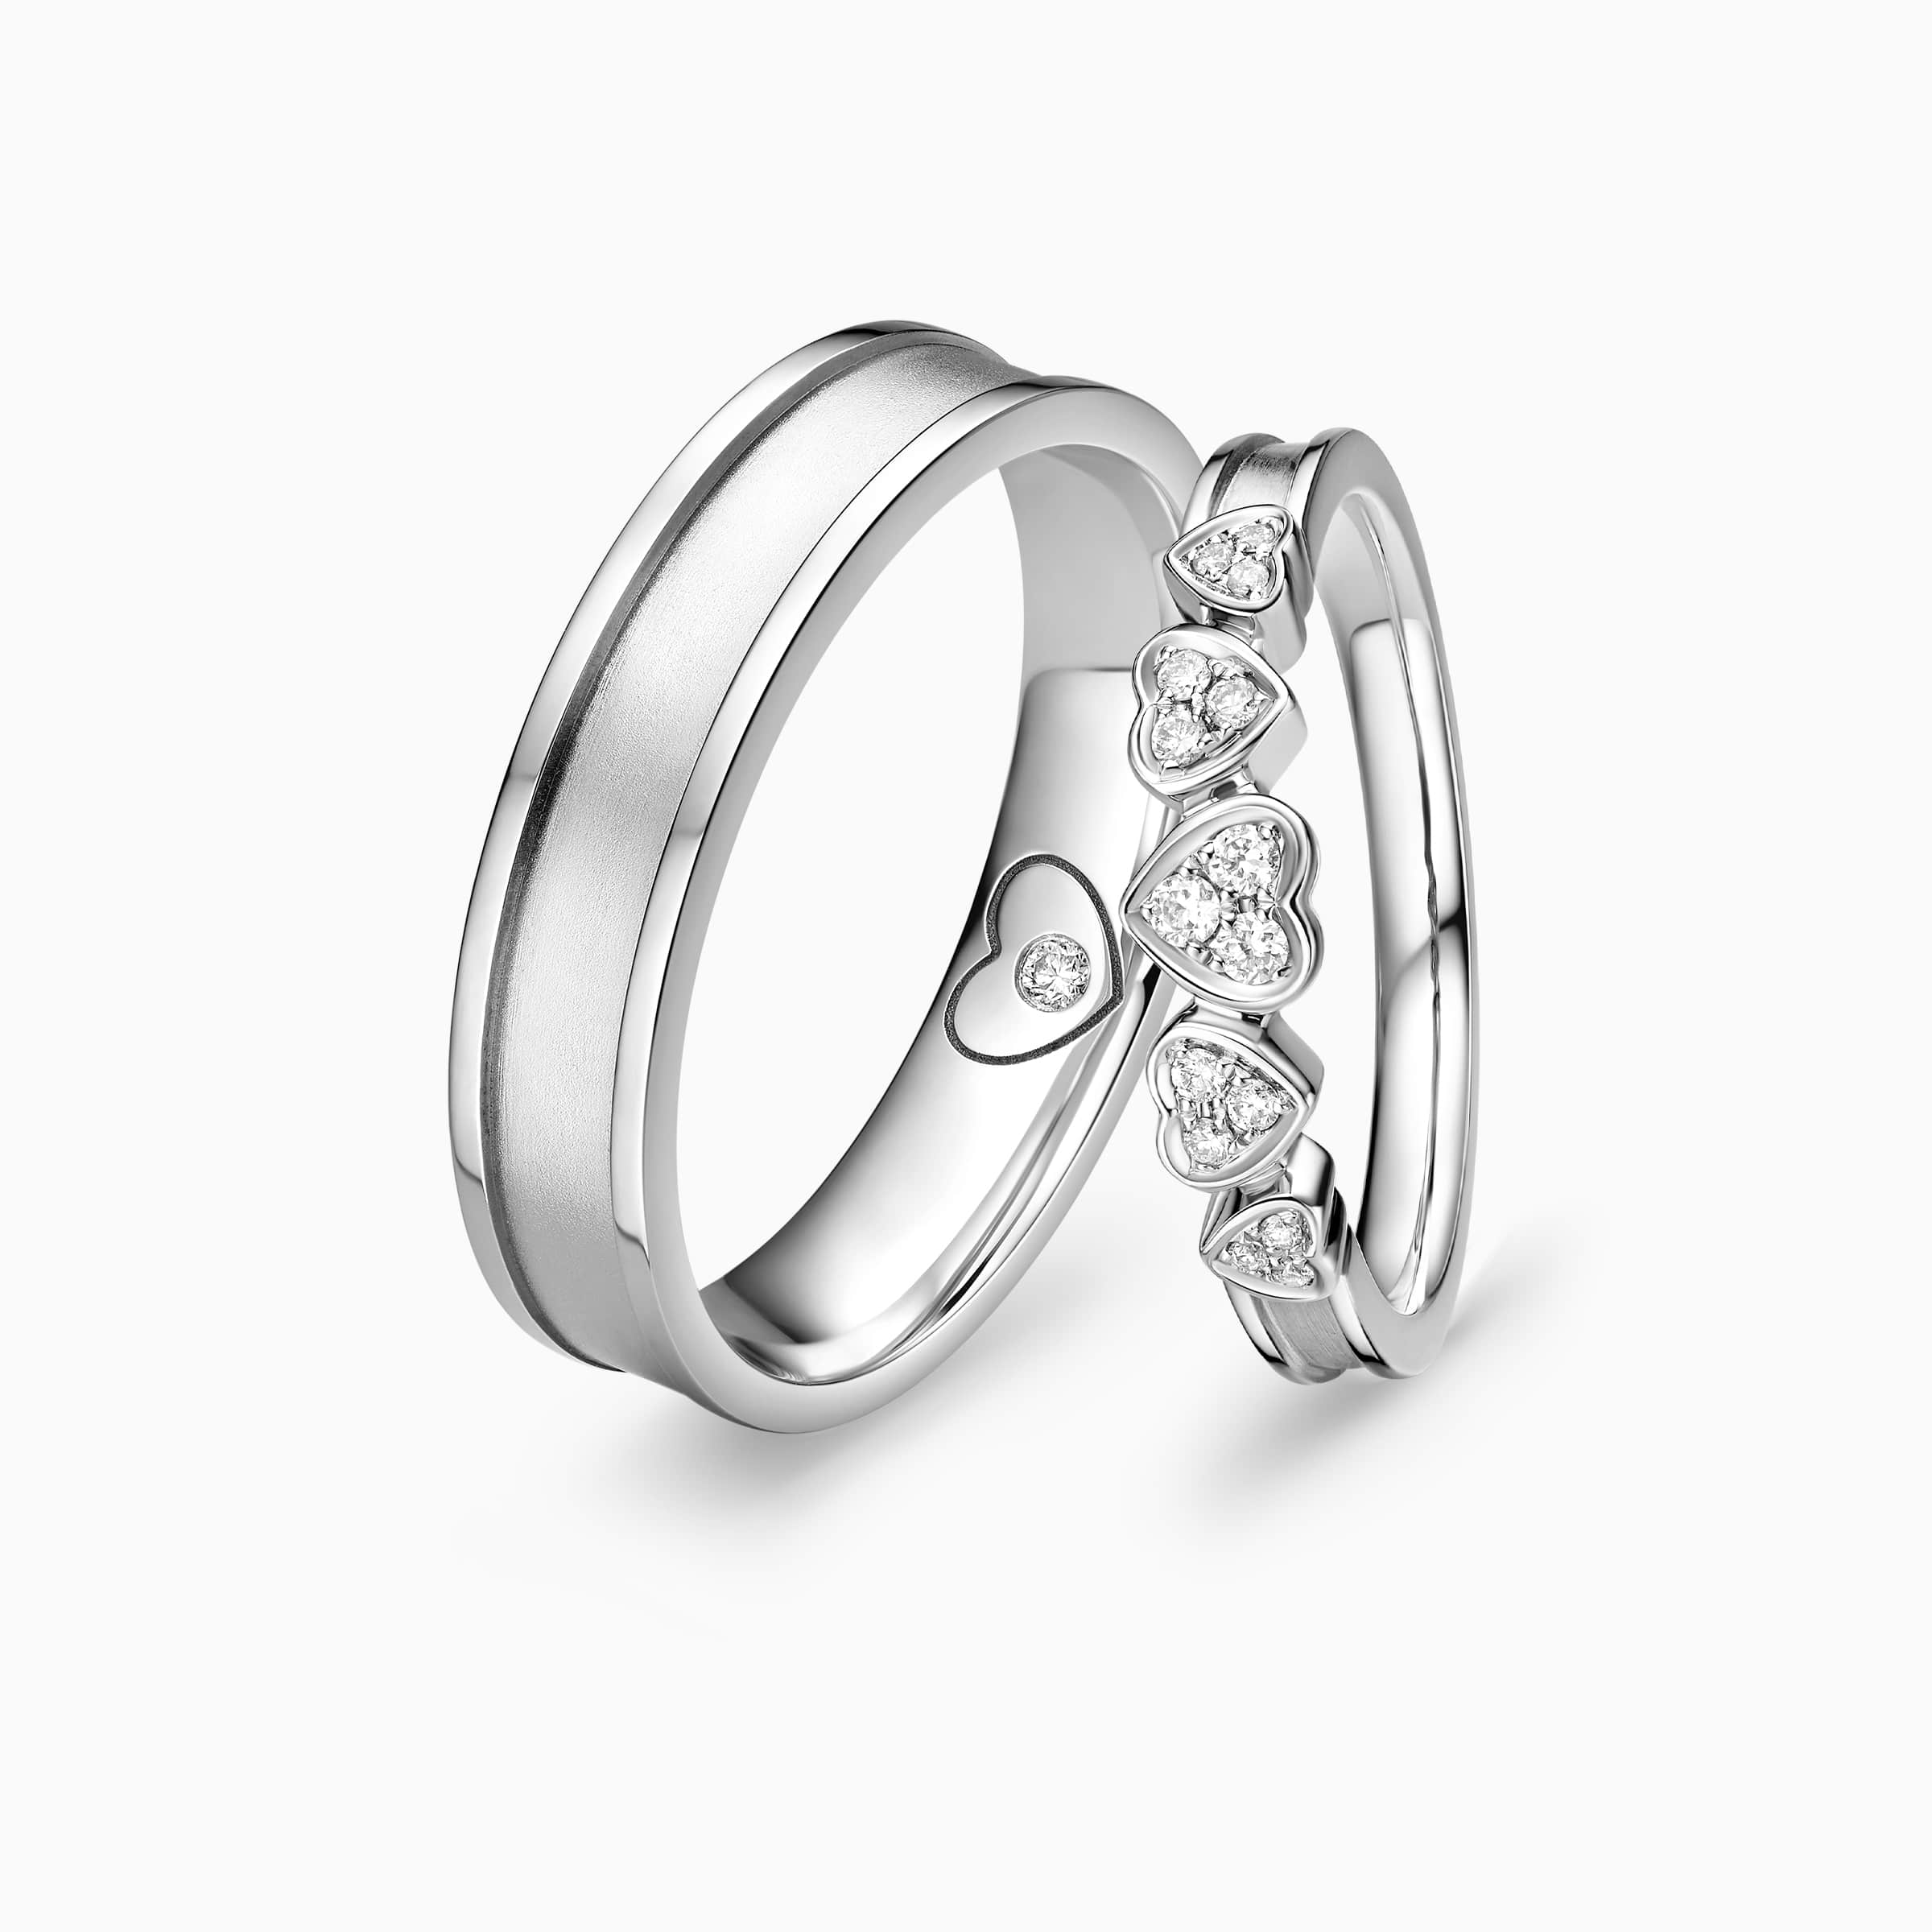 Darry Ring heart wedding ring sets for him and her in white gold